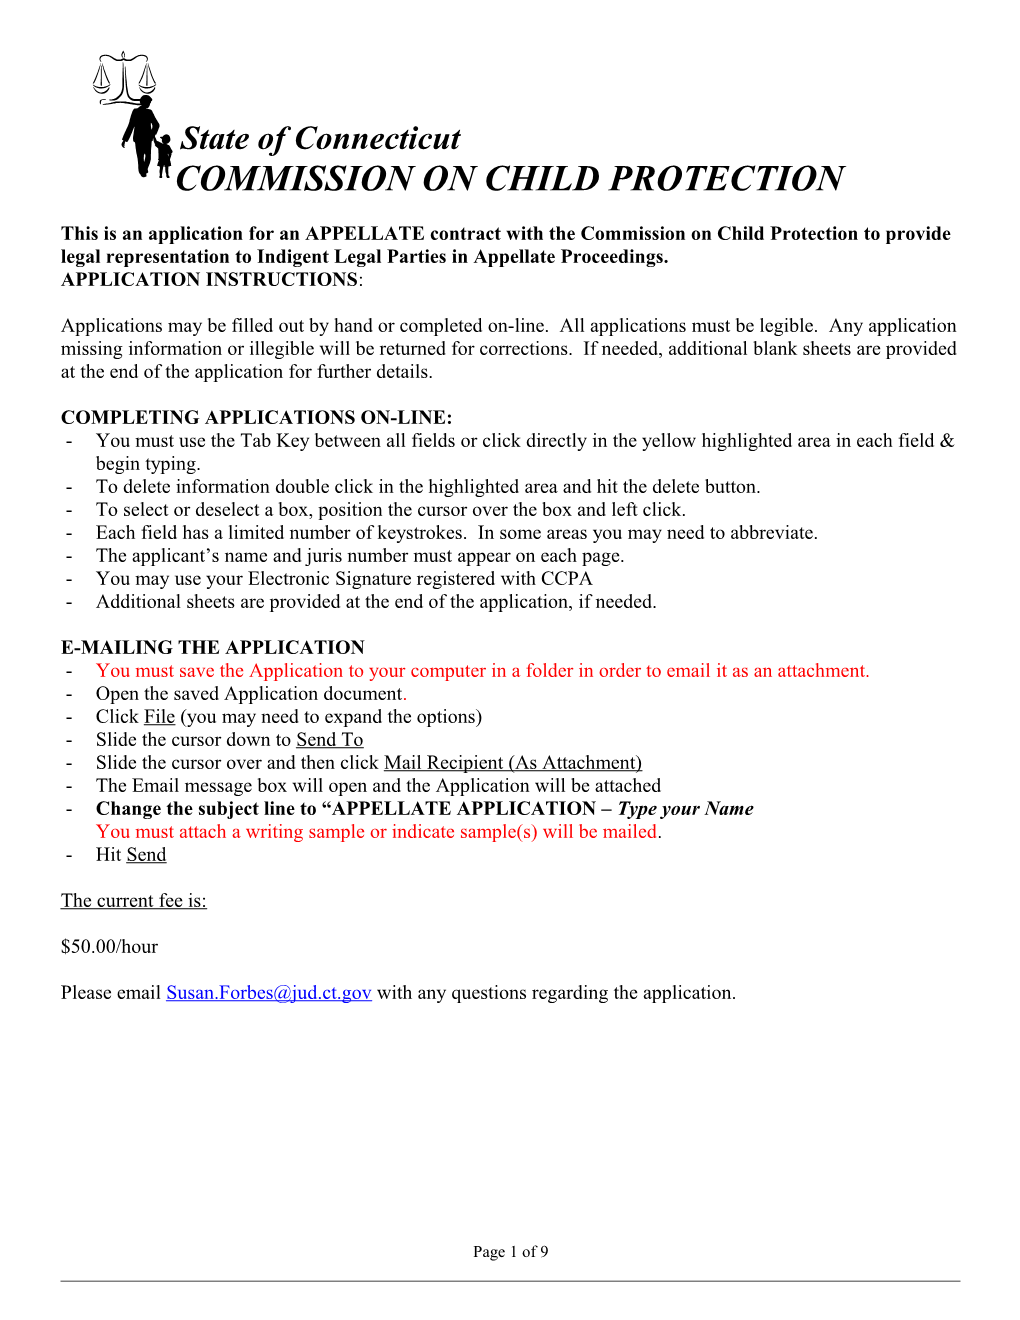 Commission on Child Protection